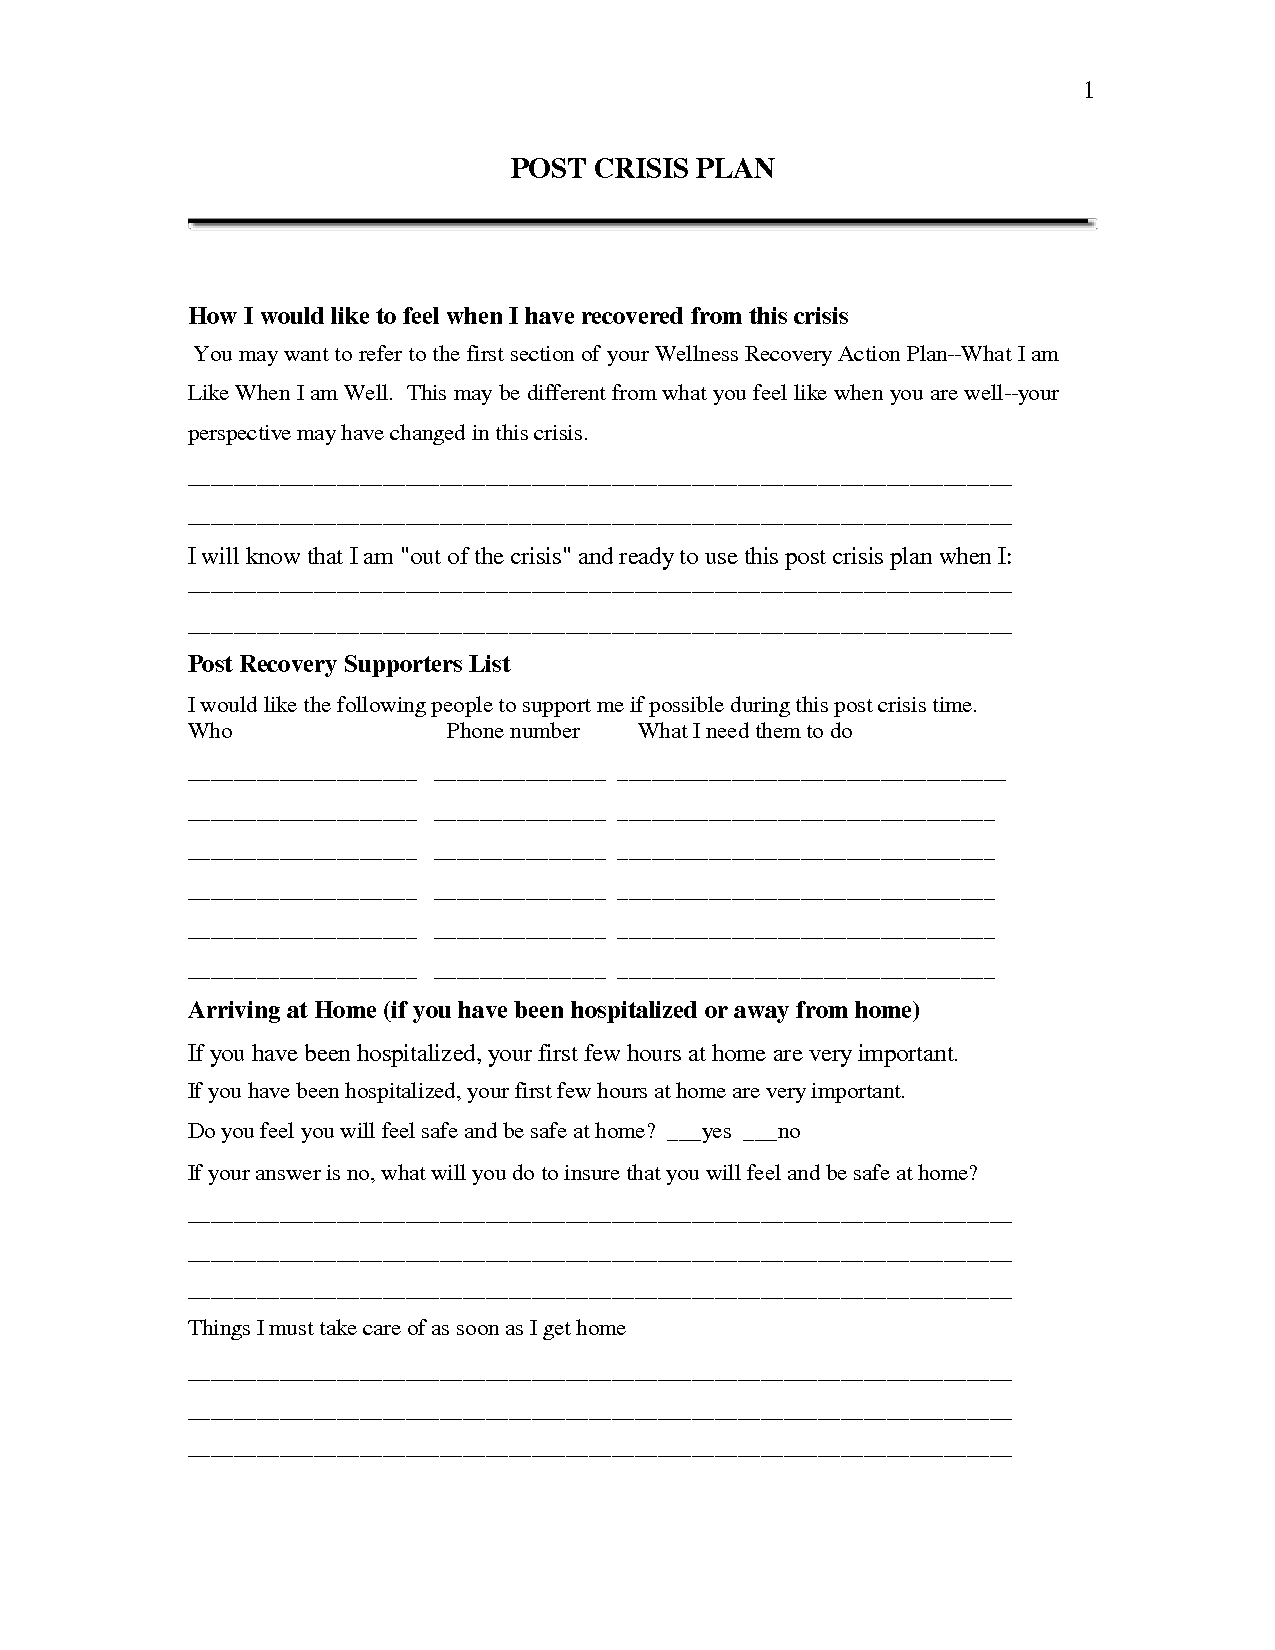 Wellness Recovery Action Plan Worksheets